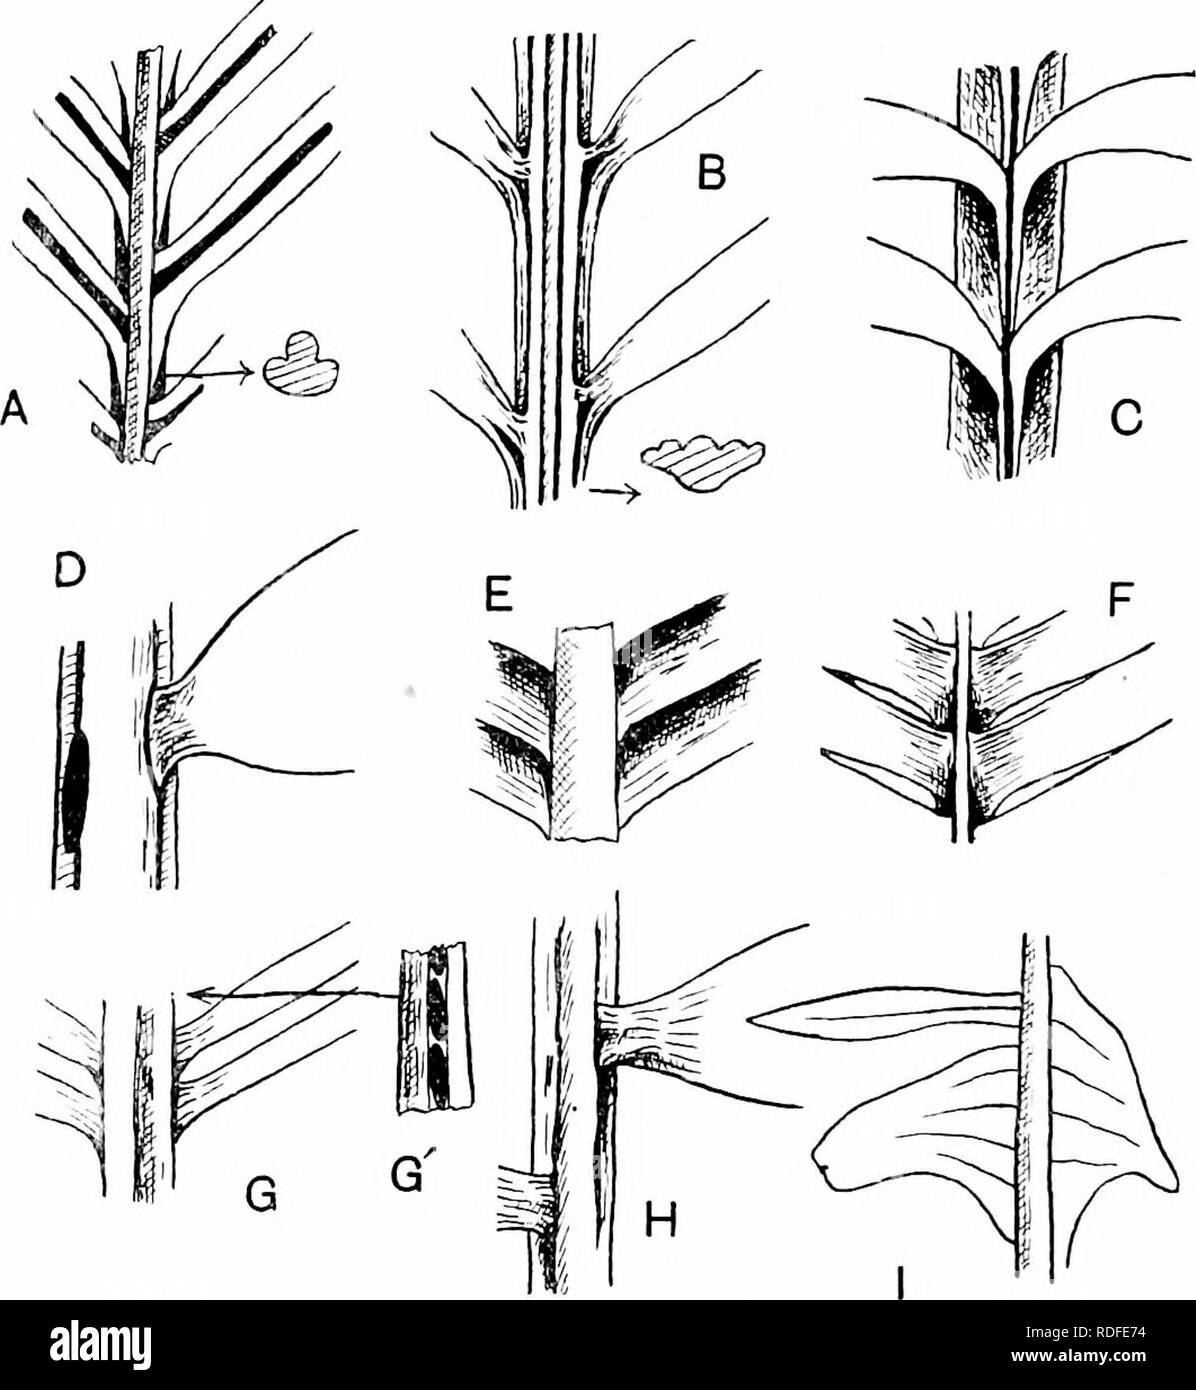 . Fossil plants : for students of botany and geology . Paleobotany. 16 CYCADALES [CH. to the upper sloping sides of the raohis which forms a prominent ridge between the rows of leaflets, and characteristic oval scars are left on the fall of the pinnae (fig. 387, D, G')- The lamina in most species contains several veins more or less parallel to the margins and often much more prominent on the lower than on the upper surface.. Via. 387. Cycadean fronds. A, Cycas circinalis; B, Macrozamia Fraseri; C, Macrozamia Denisoni; D, Encephalartos caffer; E, F, Dioon edule from below and above; G, Sncephal Stock Photo